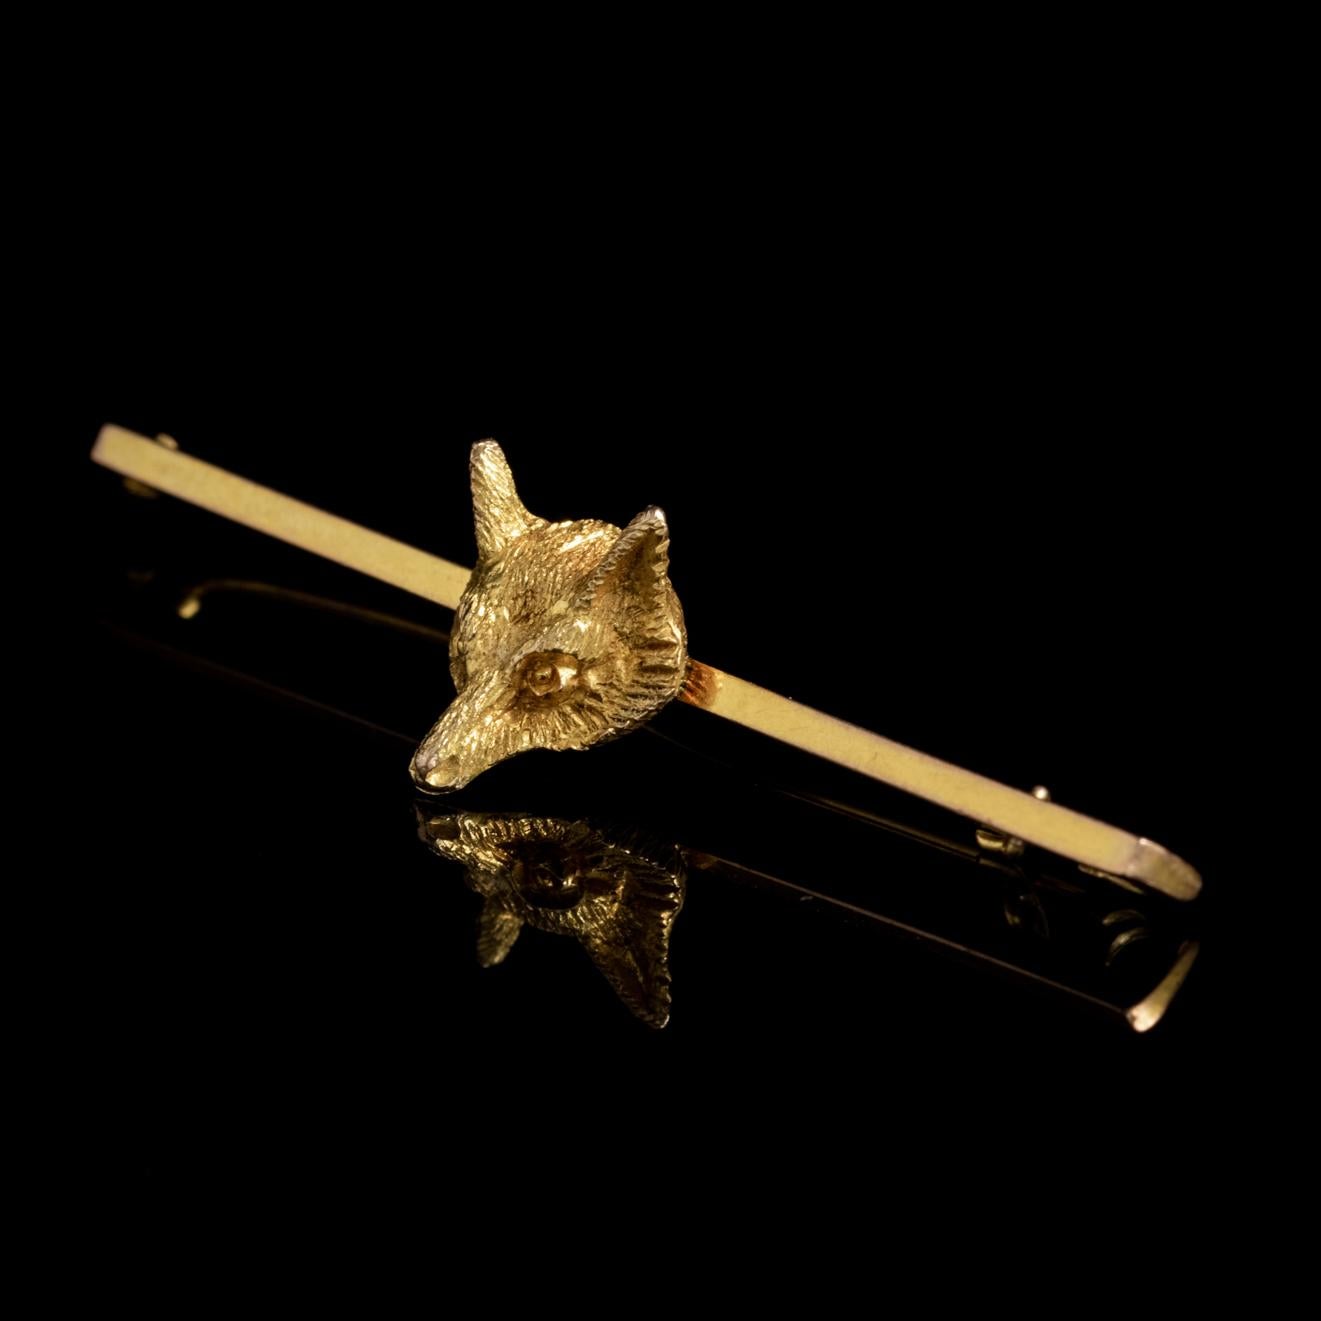 A wonderful antique Victorian bar brooch featuring a lovely engraved fox head sticking out from the centre. 

Victorian jewellery mirrored Queen Victoria’s life with the ‘Romantic’ period producing decorative animal pieces such as Foxes symbolising